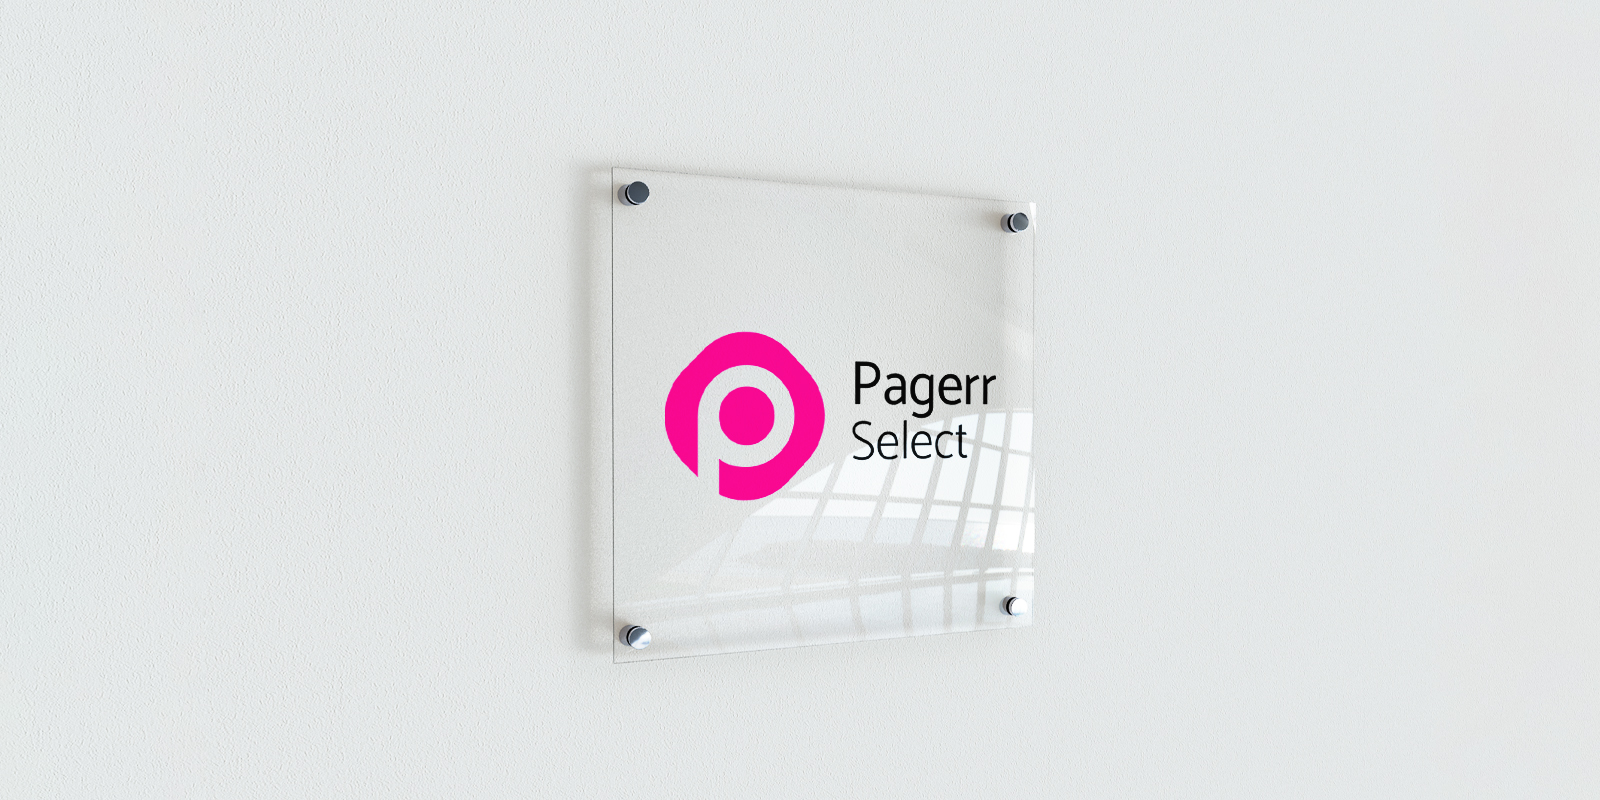 Acrylic signs in Darwin - Print with Pagerr